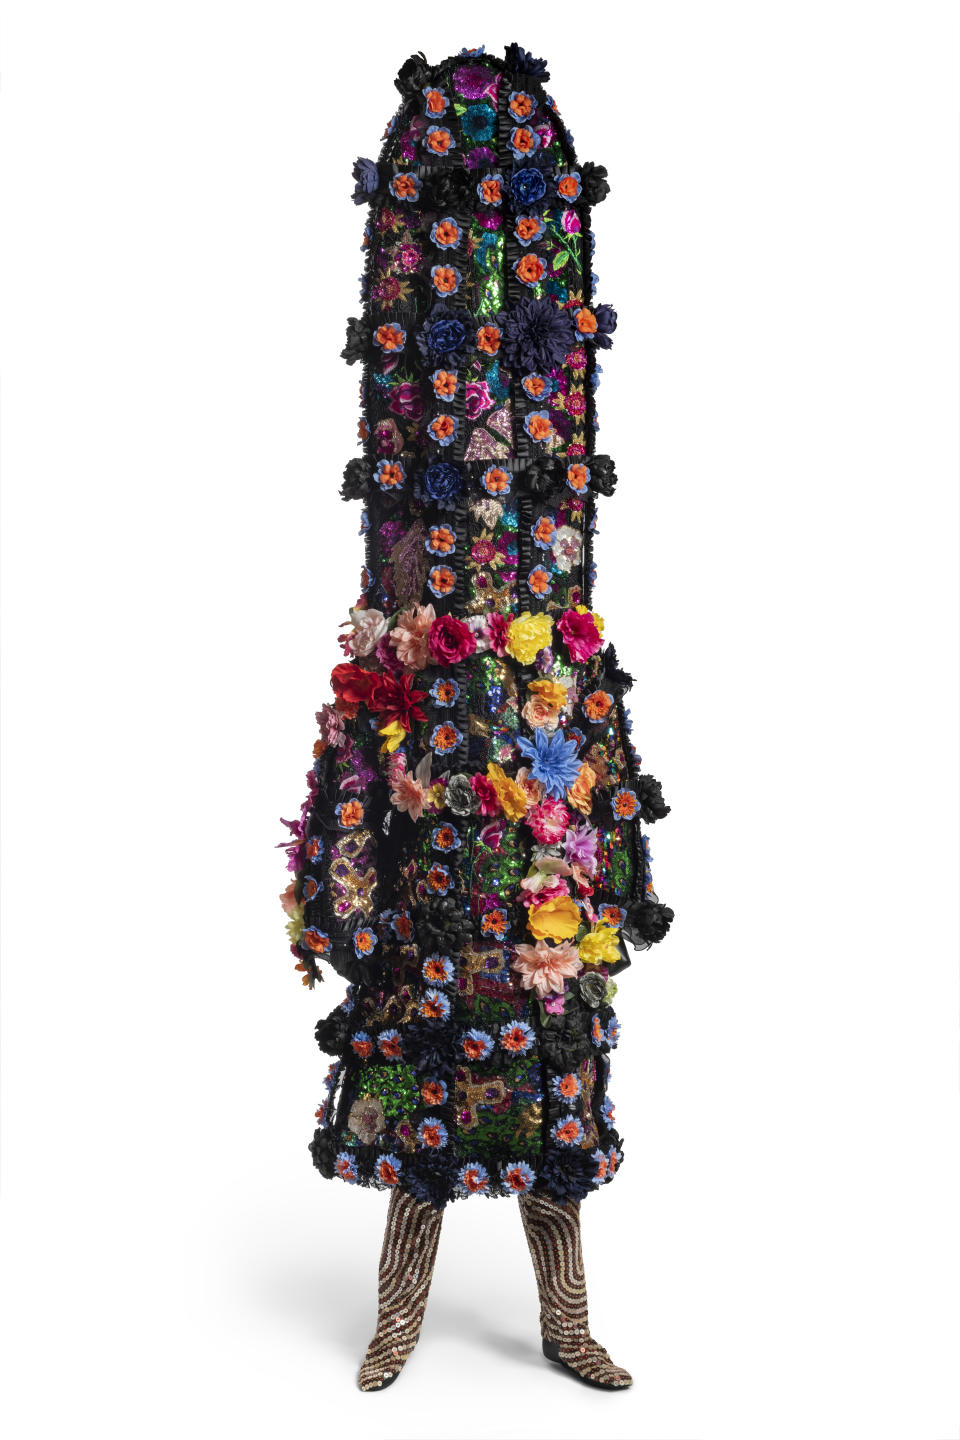 Nick Cave, Soundsuit 9:29, 2021. Mannequin and found textiles, with metal, plastic sequins, and buttons, 98 × 33 × 22 in.